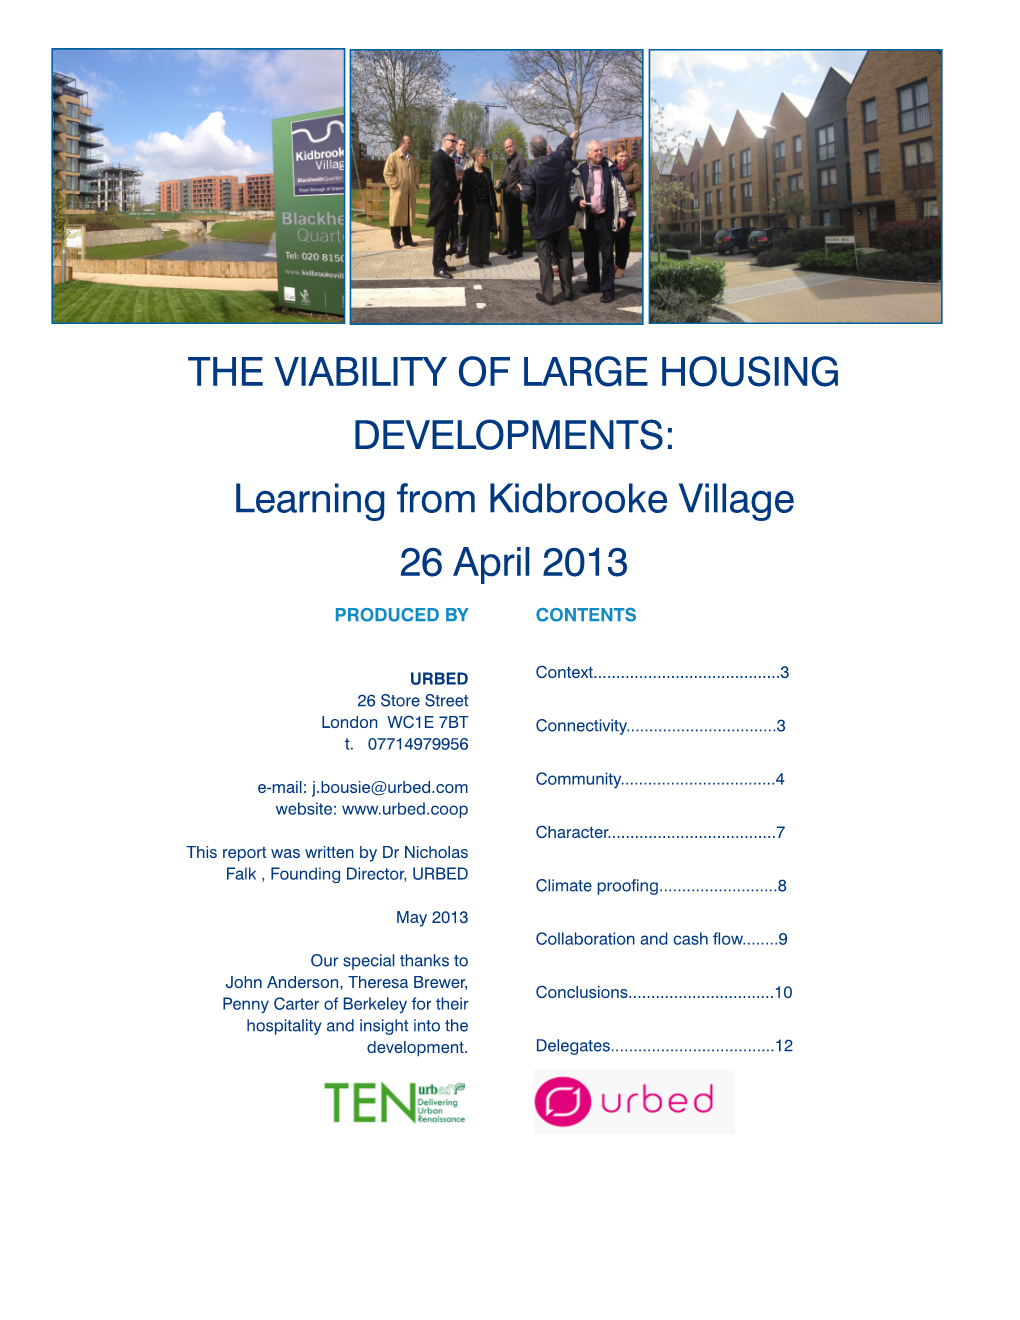 THE VIABILITY of LARGE HOUSING DEVELOPMENTS: Learning from Kidbrooke Village 26 April 2013